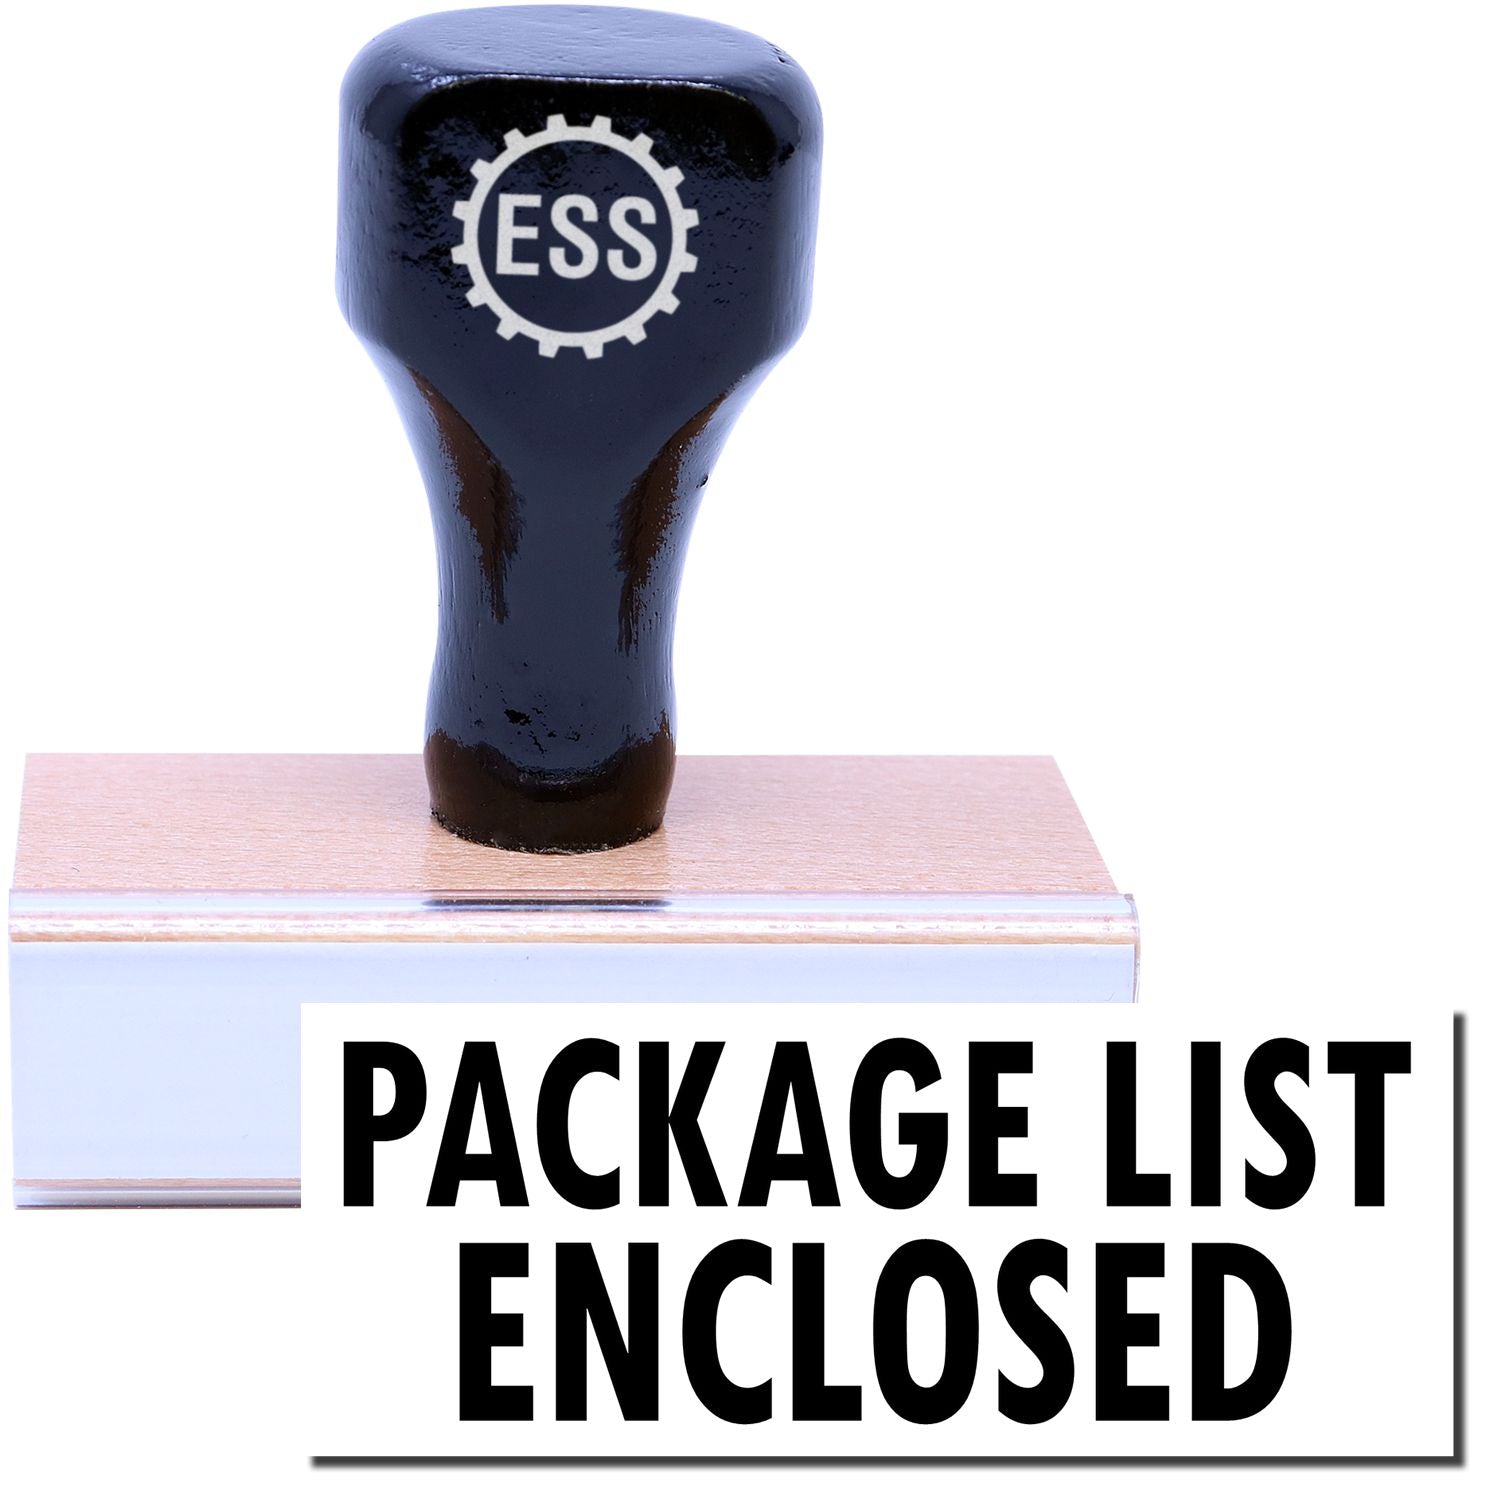 A stock office rubber stamp with a stamped image showing how the text "PACKAGE LIST ENCLOSED" is displayed after stamping.